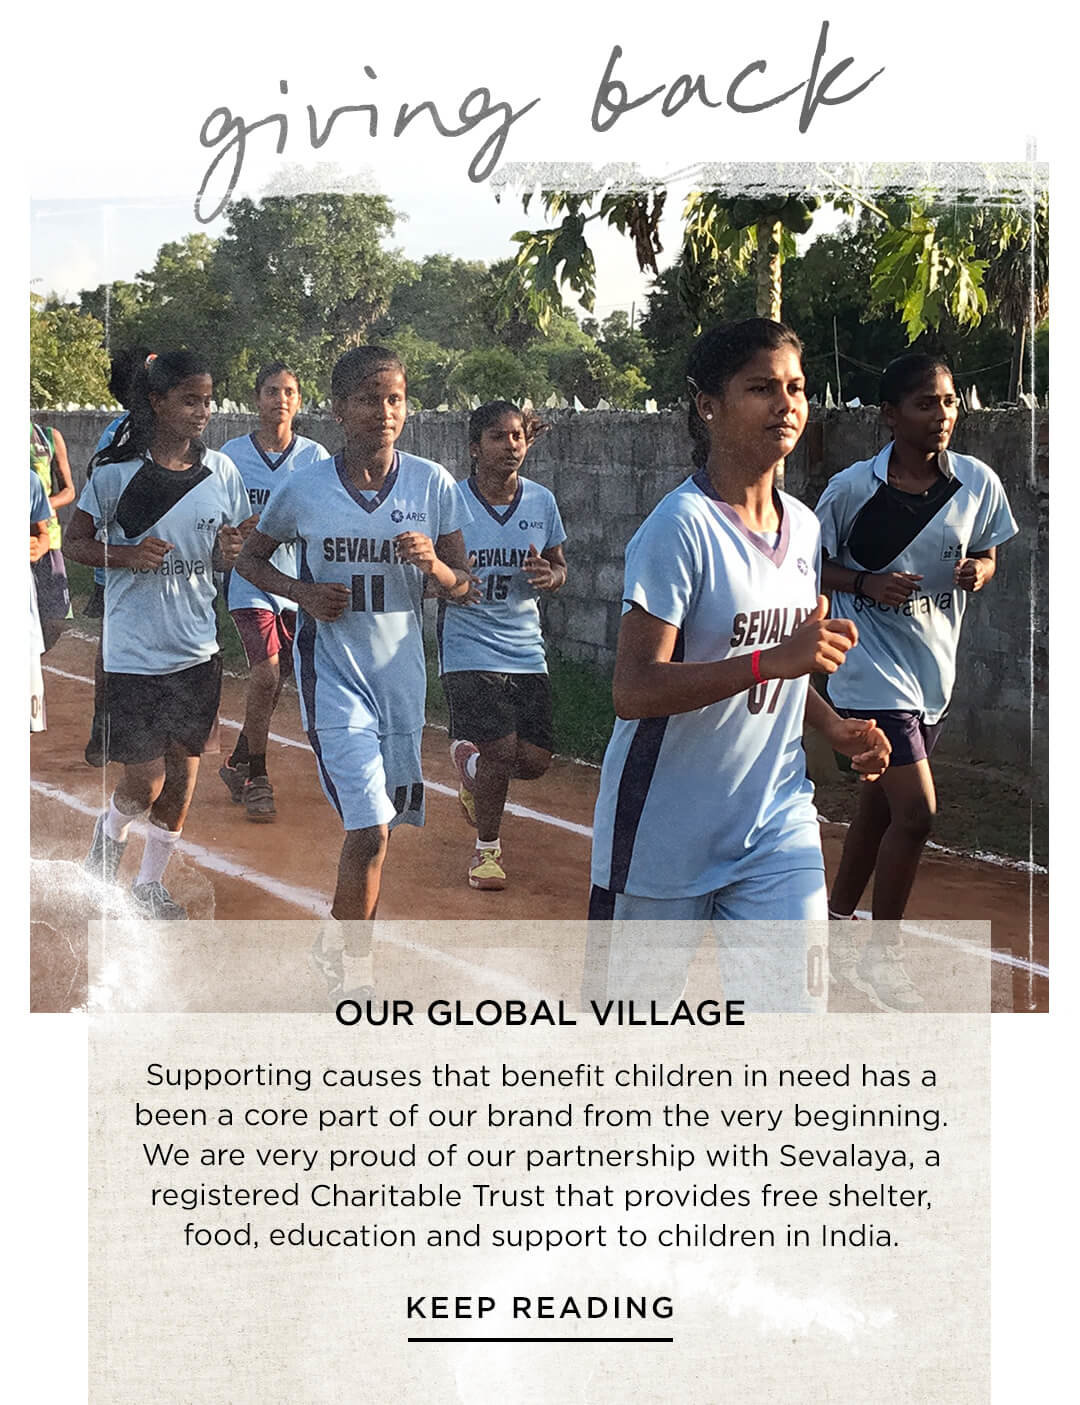 Our global village: We are very proud of our partnership with Sevalaya, a registered Charitable Trust that provides free shelter, food, education and support to children in India.